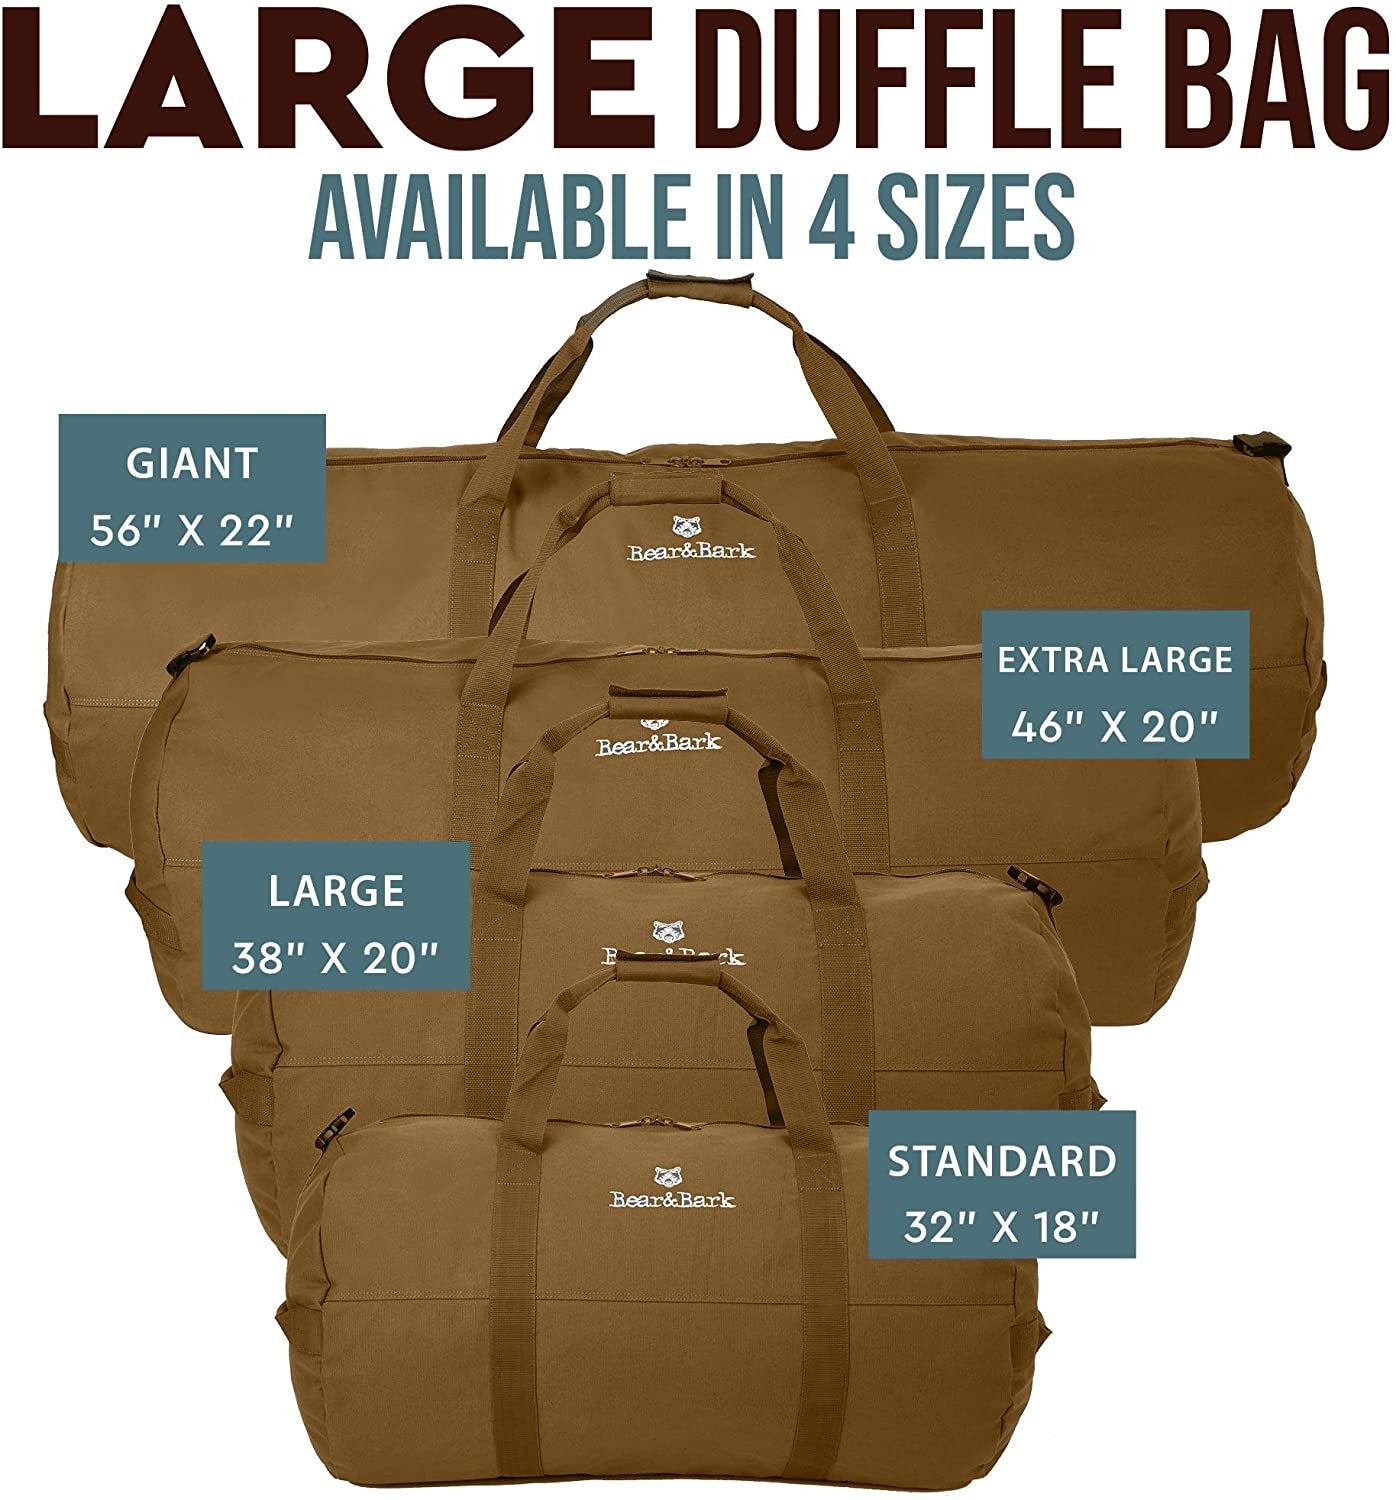 Very Large Duffle Bag – Desert Brown 38”x20” - 195.6L - Canvas Military and Army Cargo Style Duffel Tote for Men and Women– College Student, Gym, Backpacking, Travel Luggage and Storage Shoulder Bag